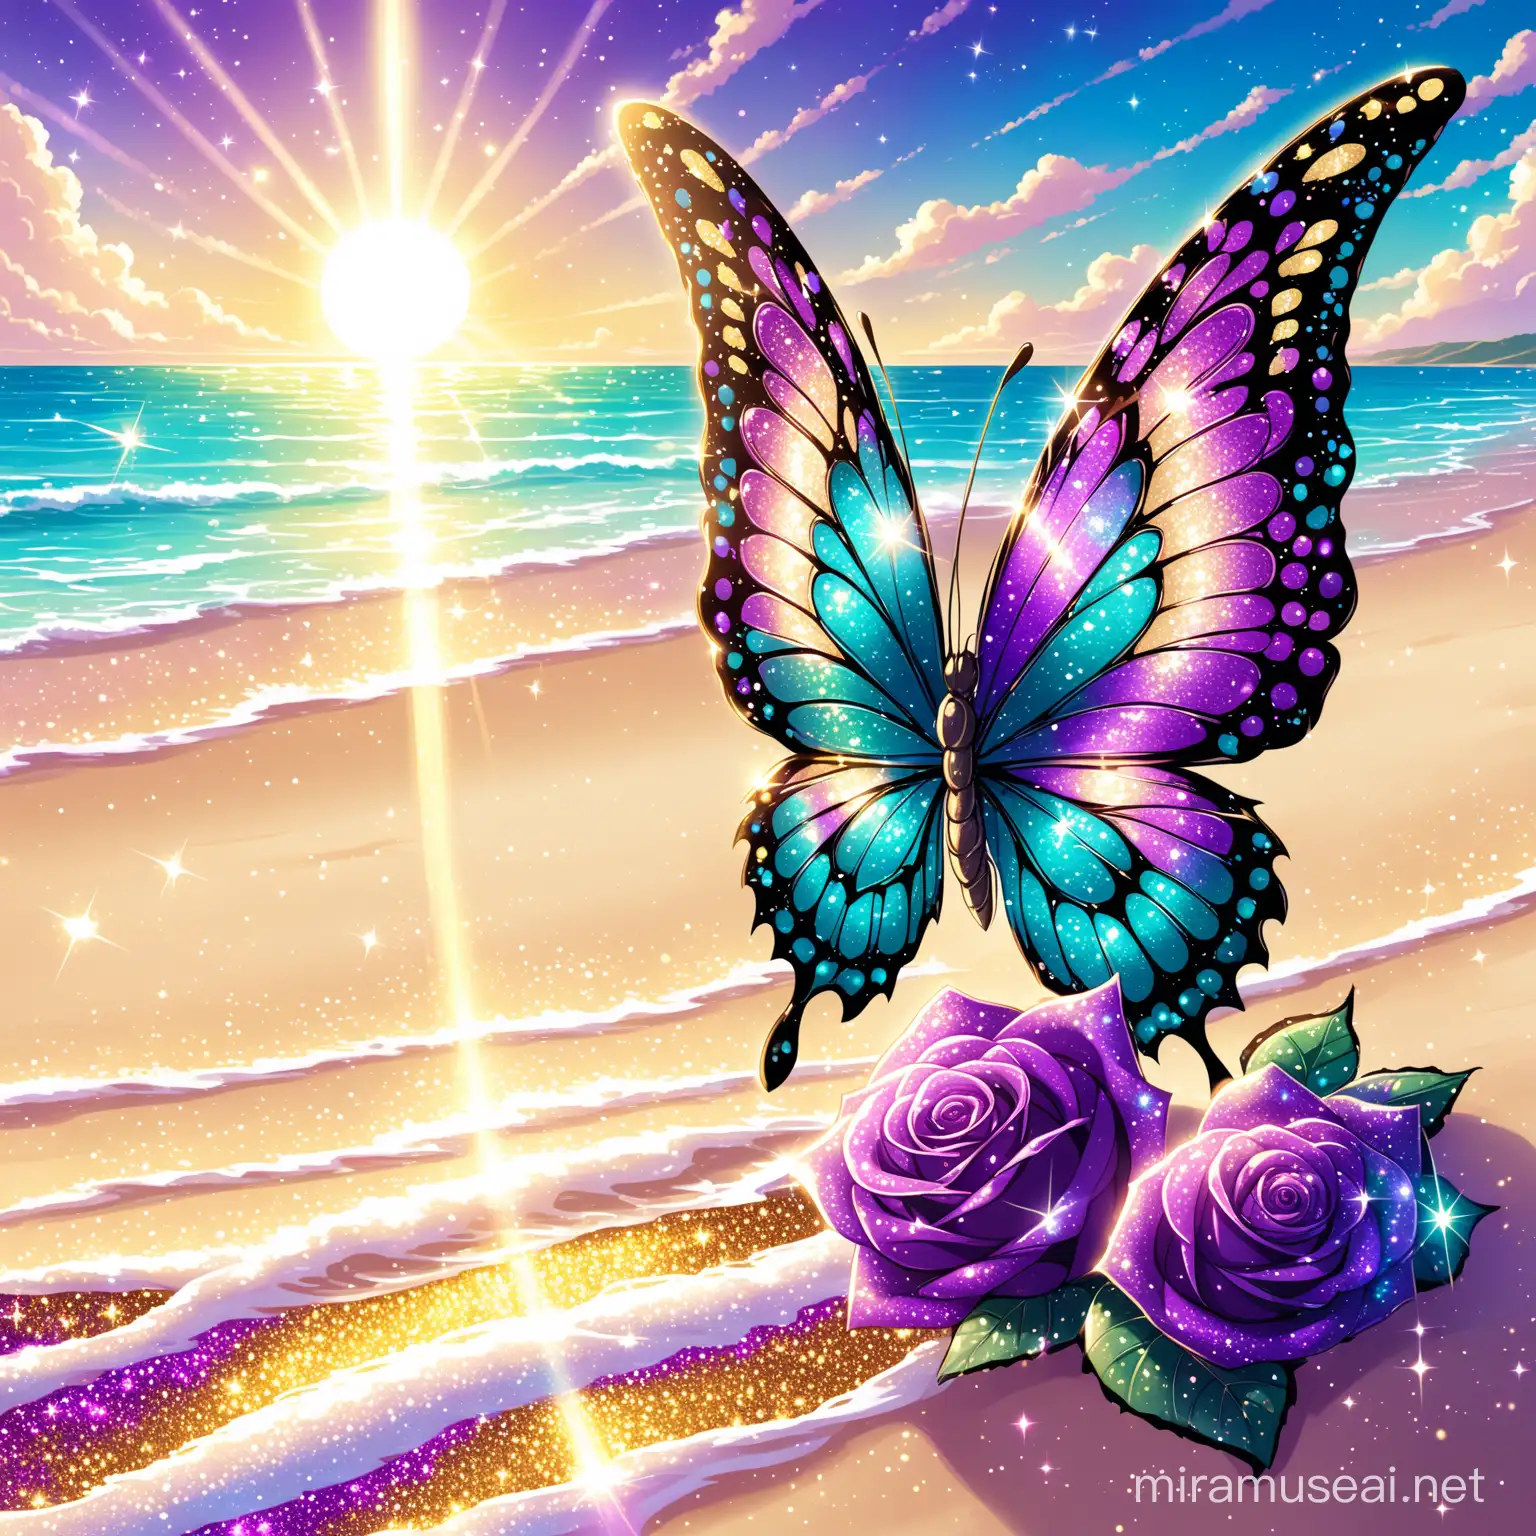 Butterfly with Purple and Teal Roses on Sunny Beach